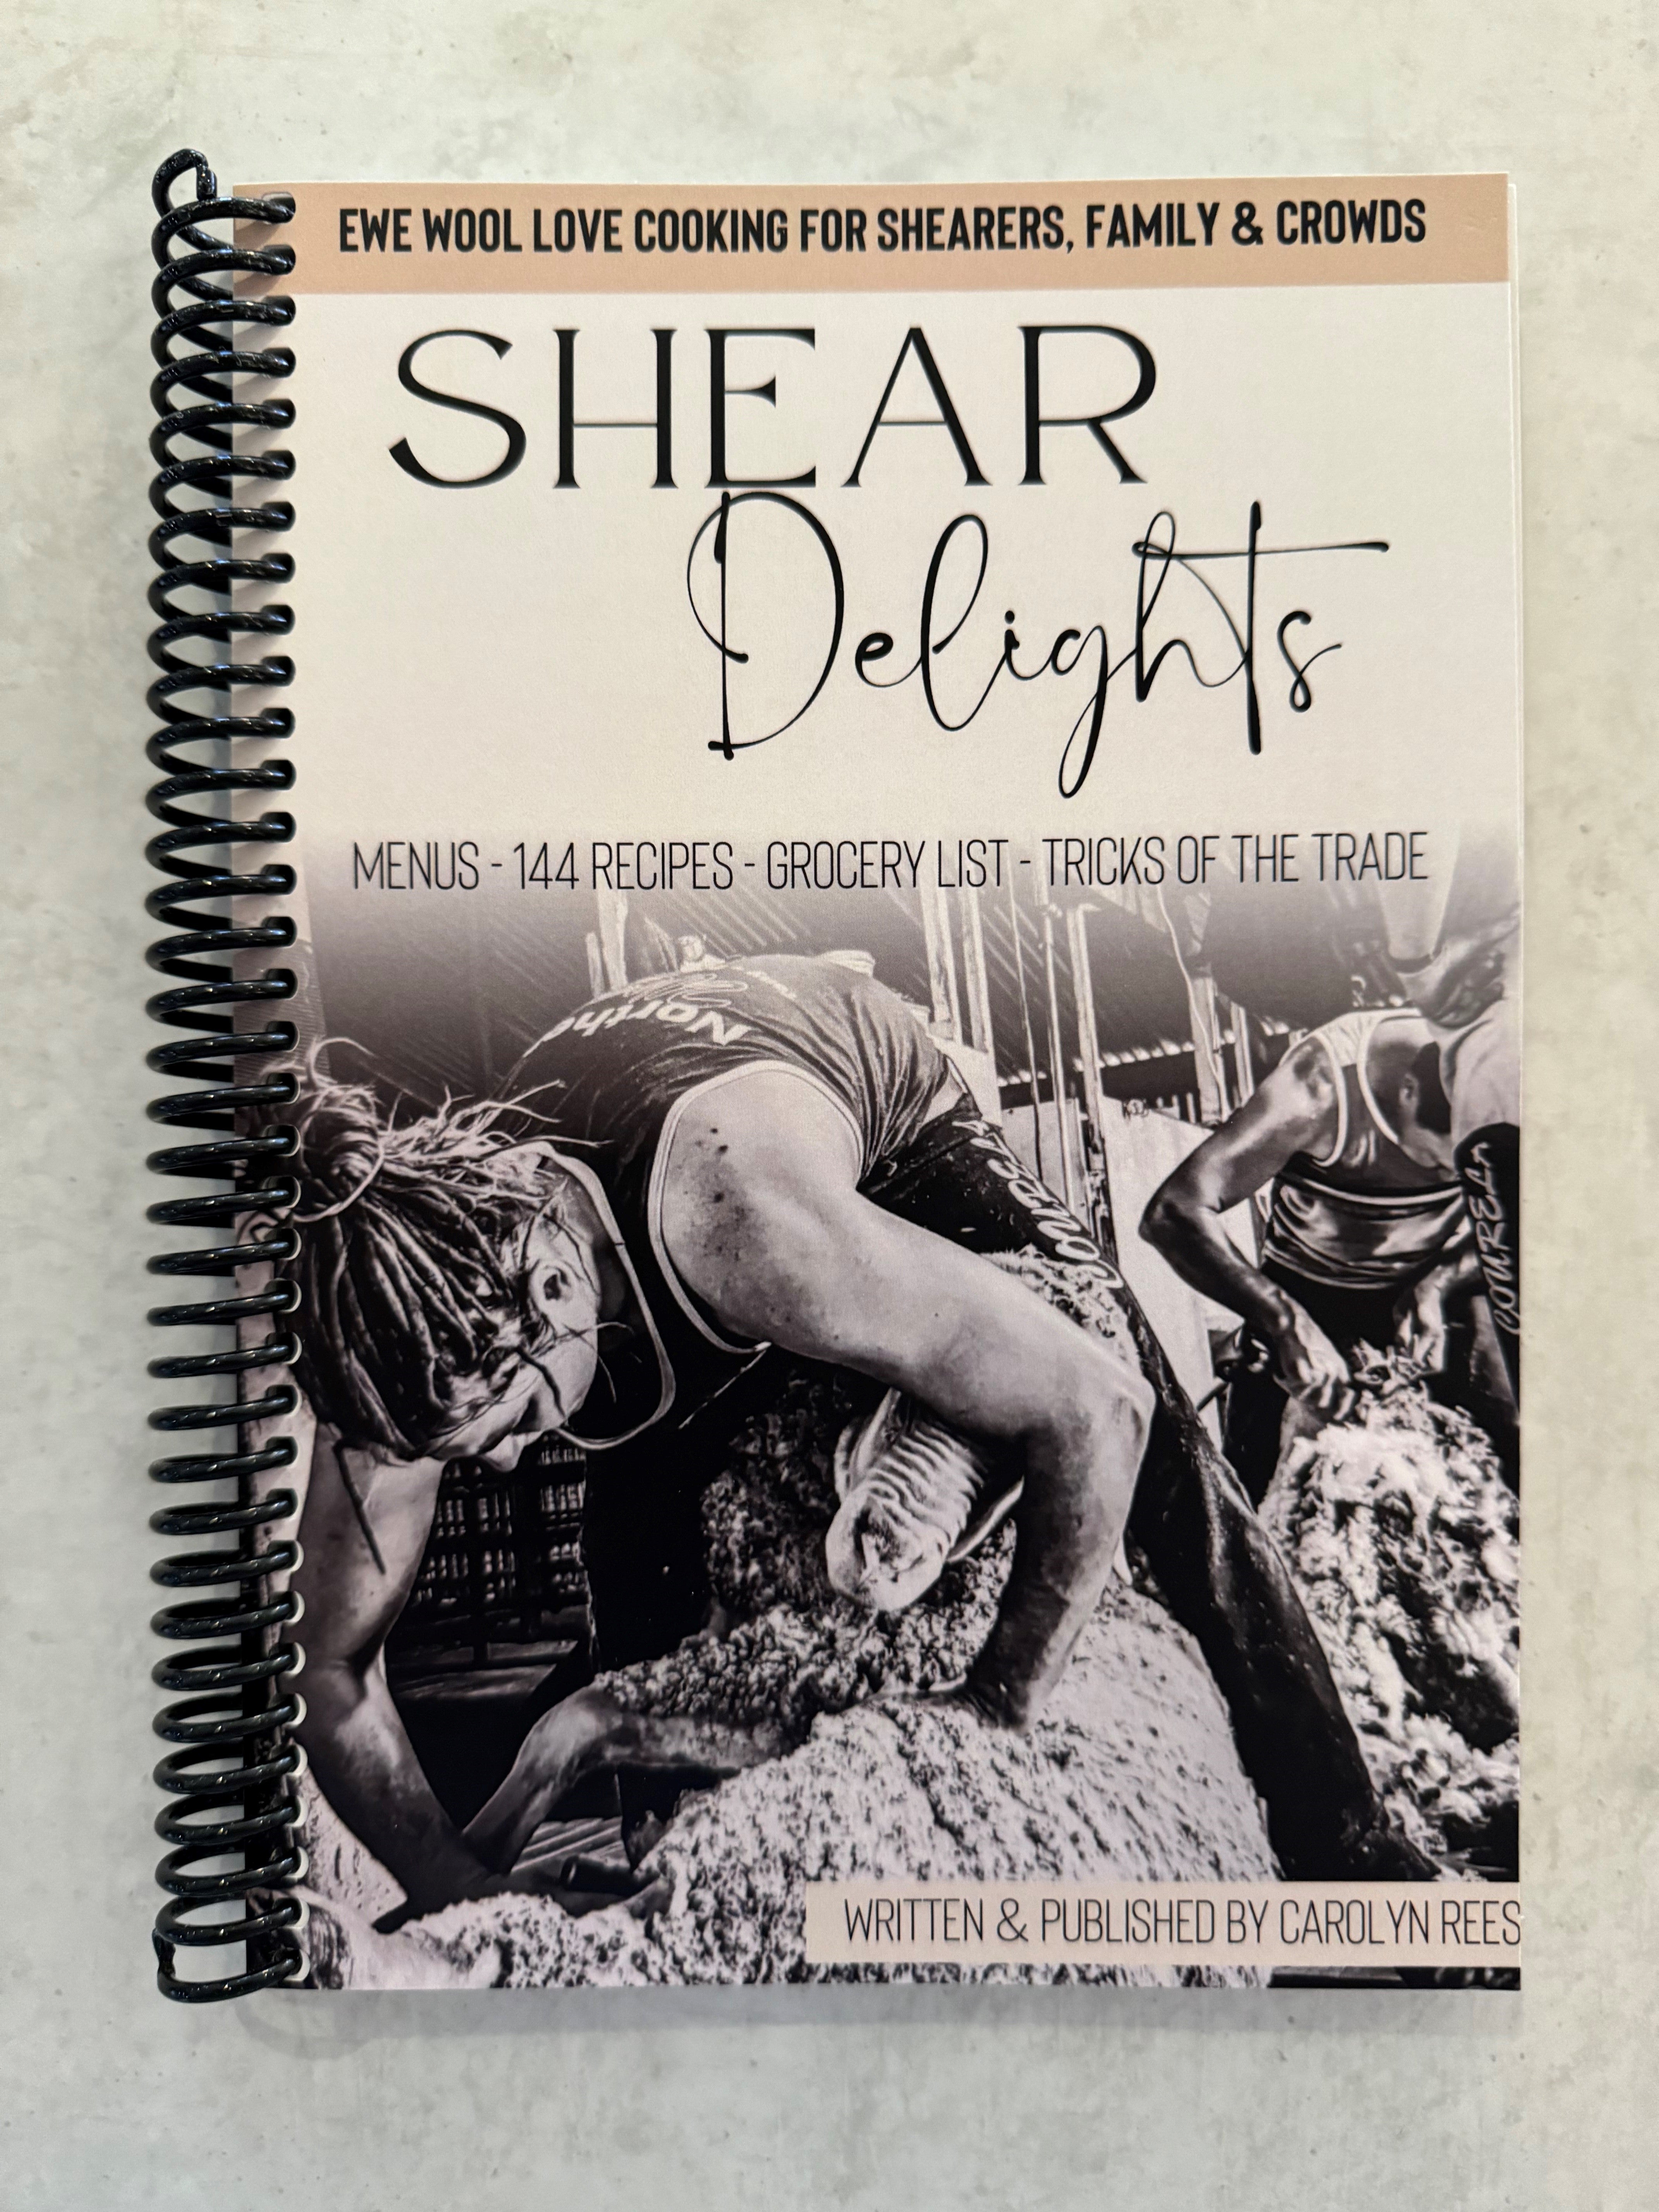 Shear Delights by Carolyn Rees